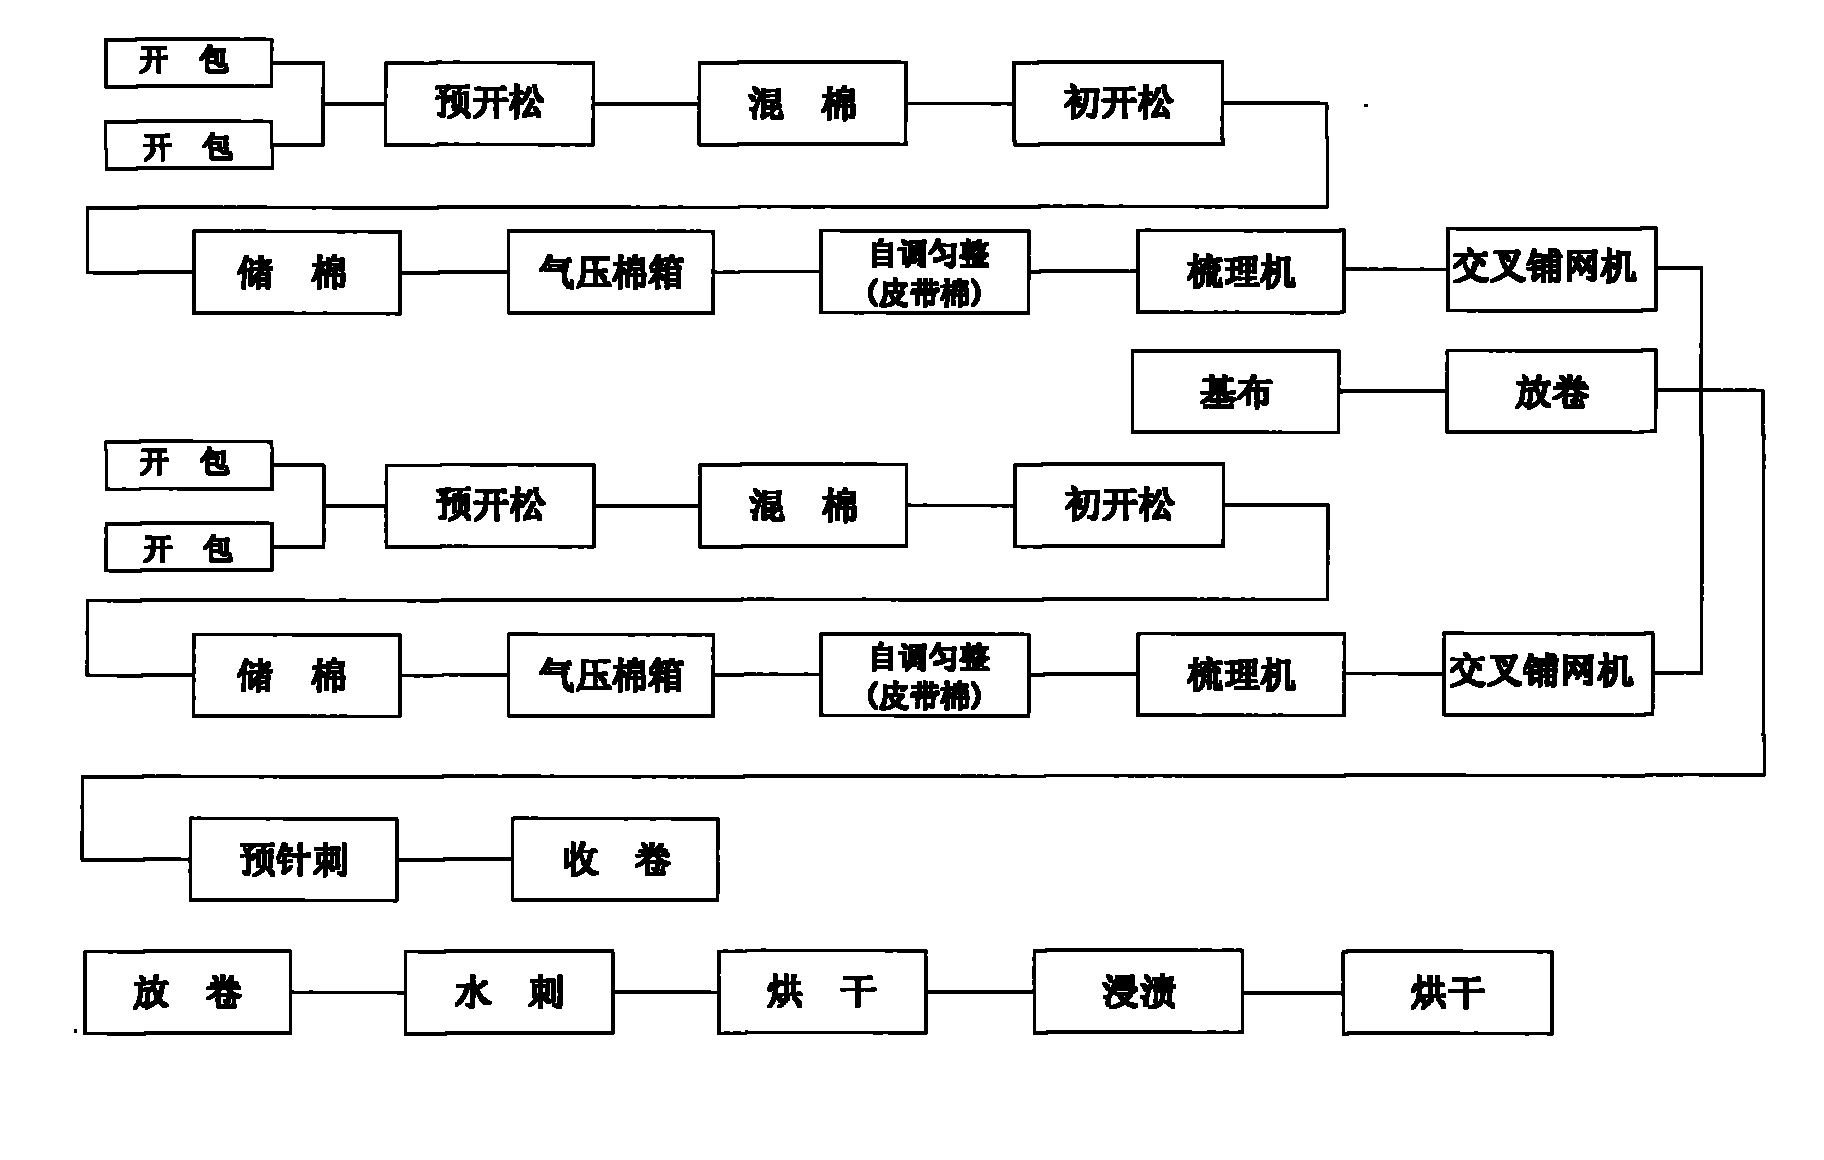 Preparation method of specific composite filter material for coal-fired power plant electric bag integration project